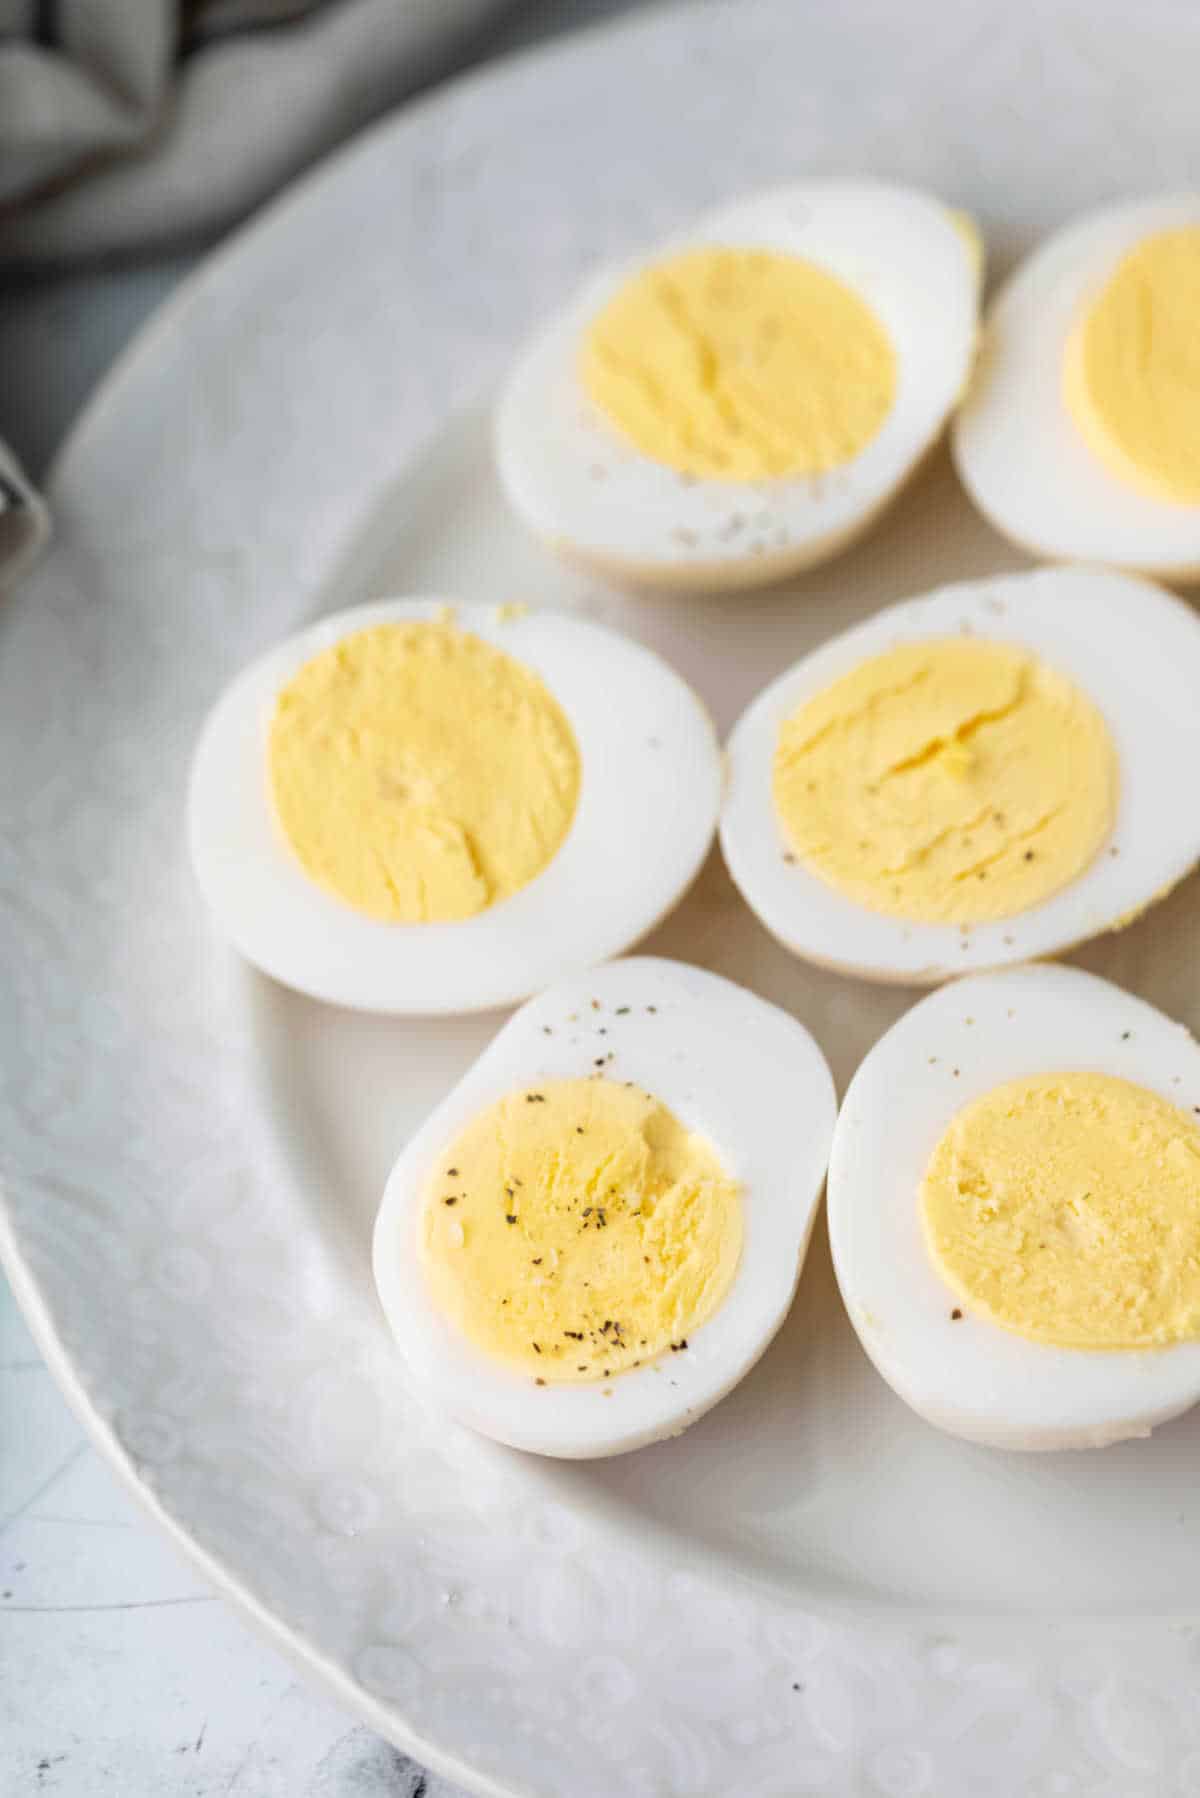 Hard boiled eggs sliced in half on a white plate.